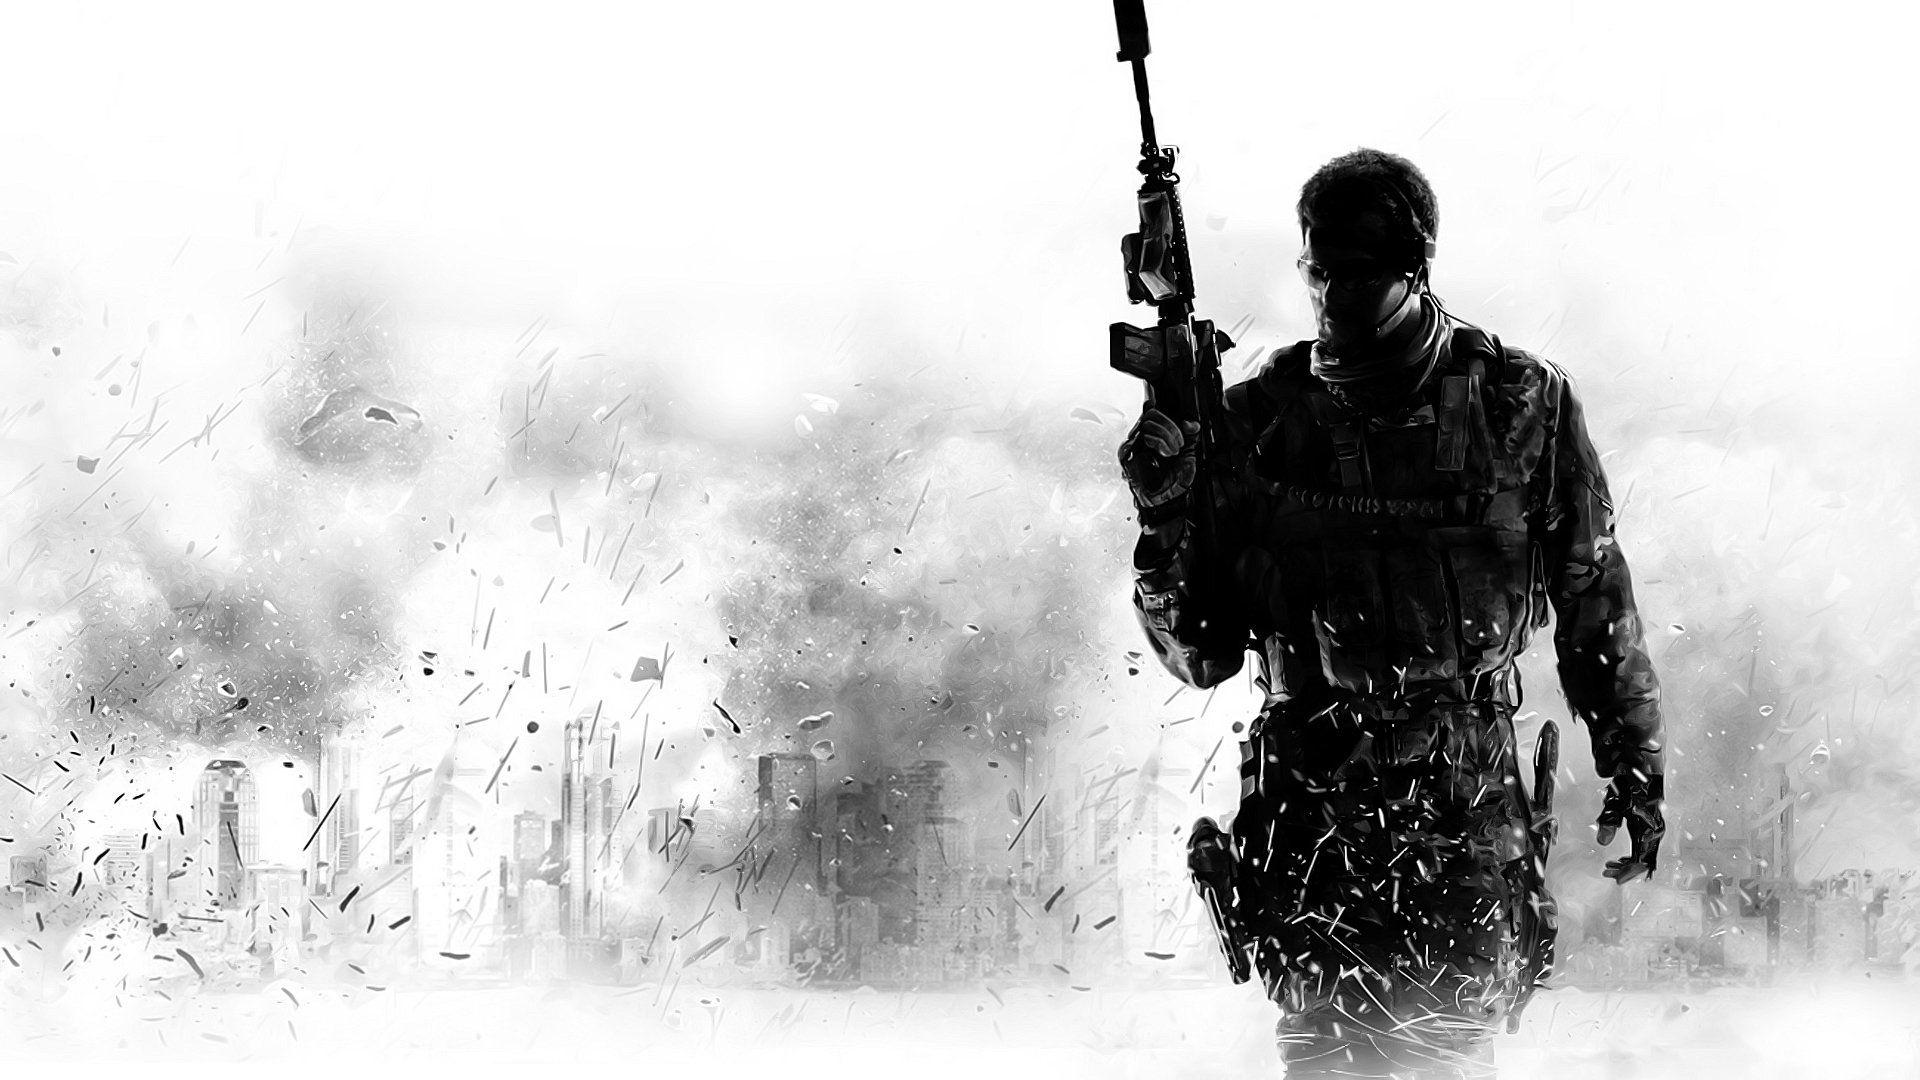 Call of Duty: Modern Warfare 3 HD Wallpaper and Background Image